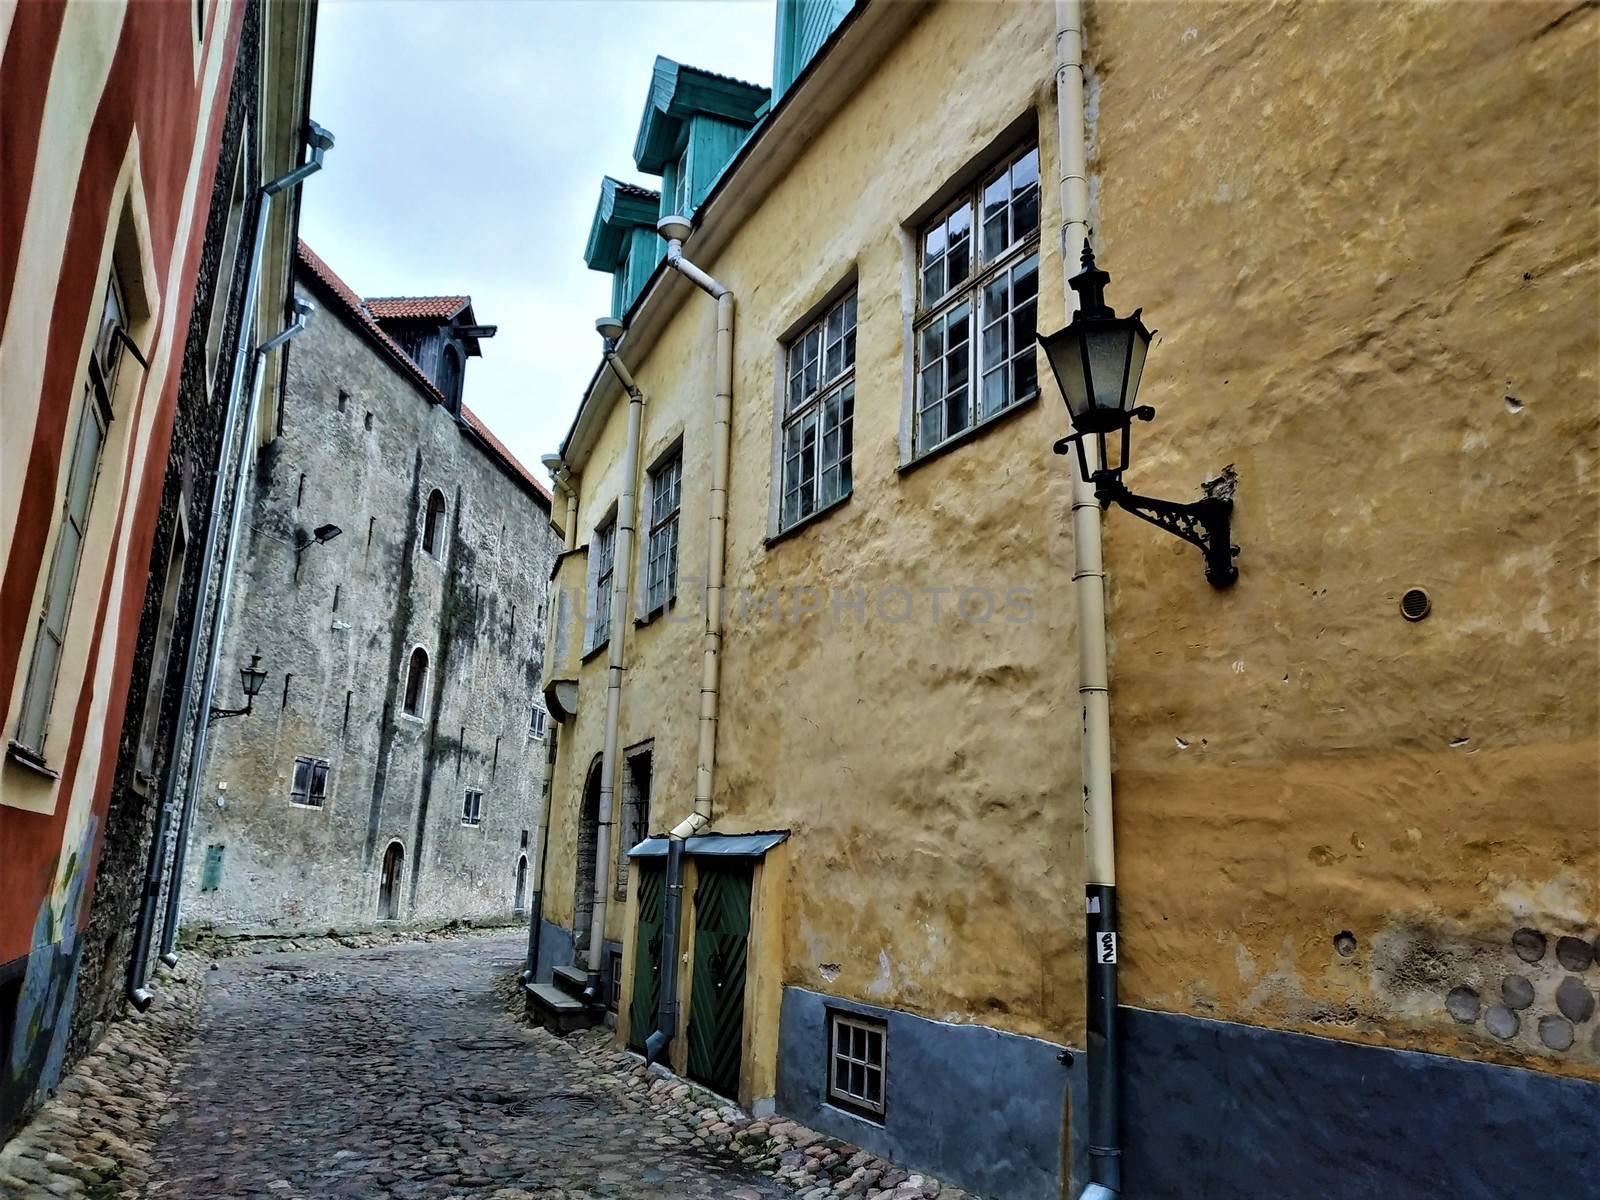 Beautiful old cobblestone street with colorful houses in Tallinn, Estonia